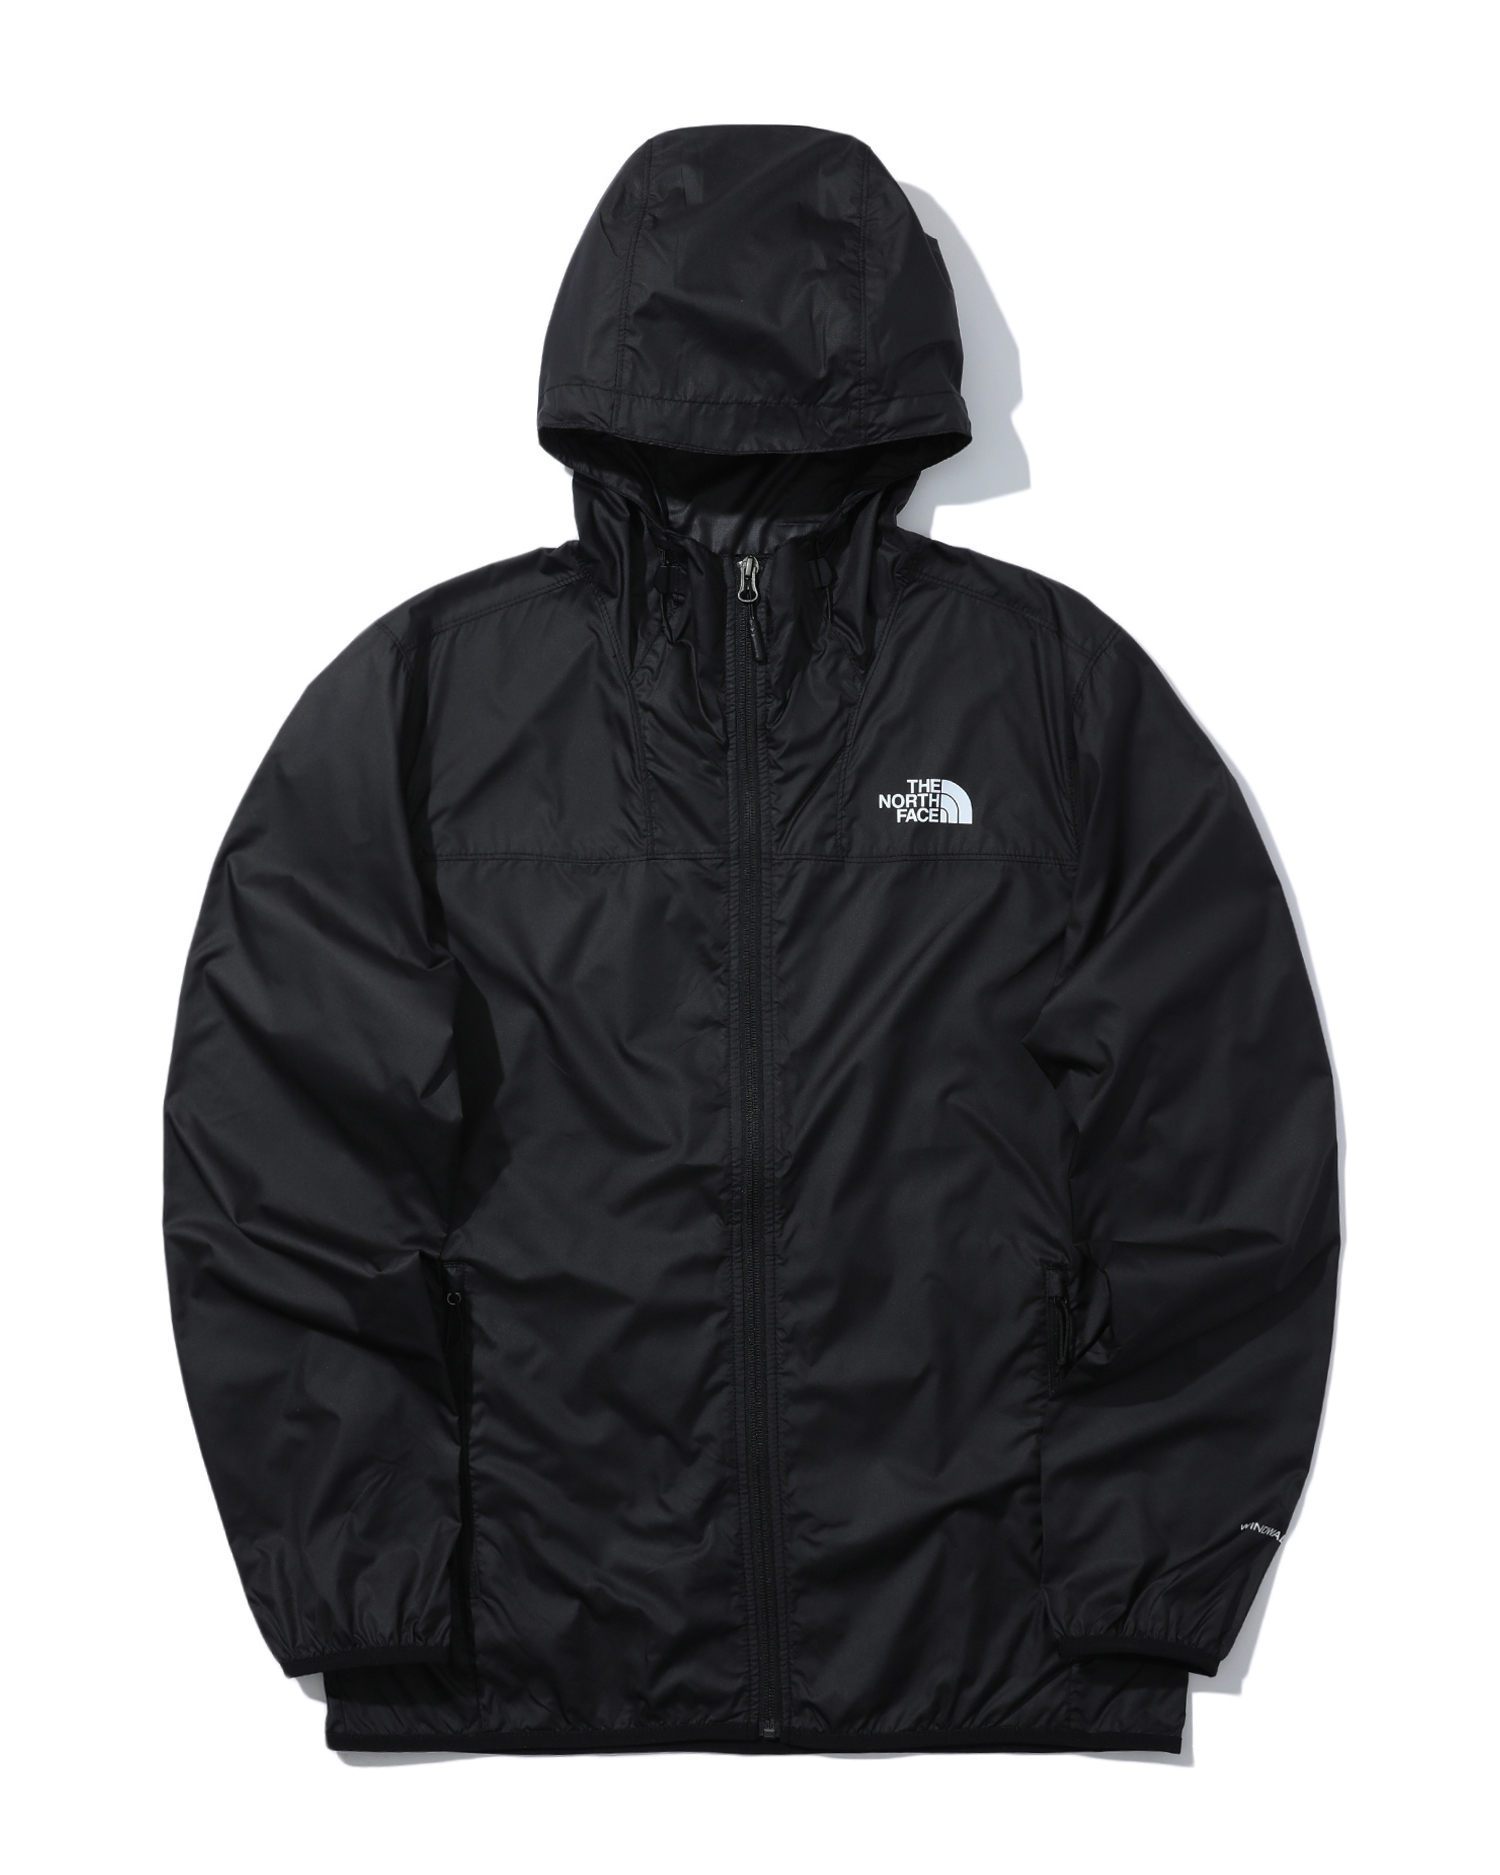 THE NORTH FACE Cyclone 2 hoodie